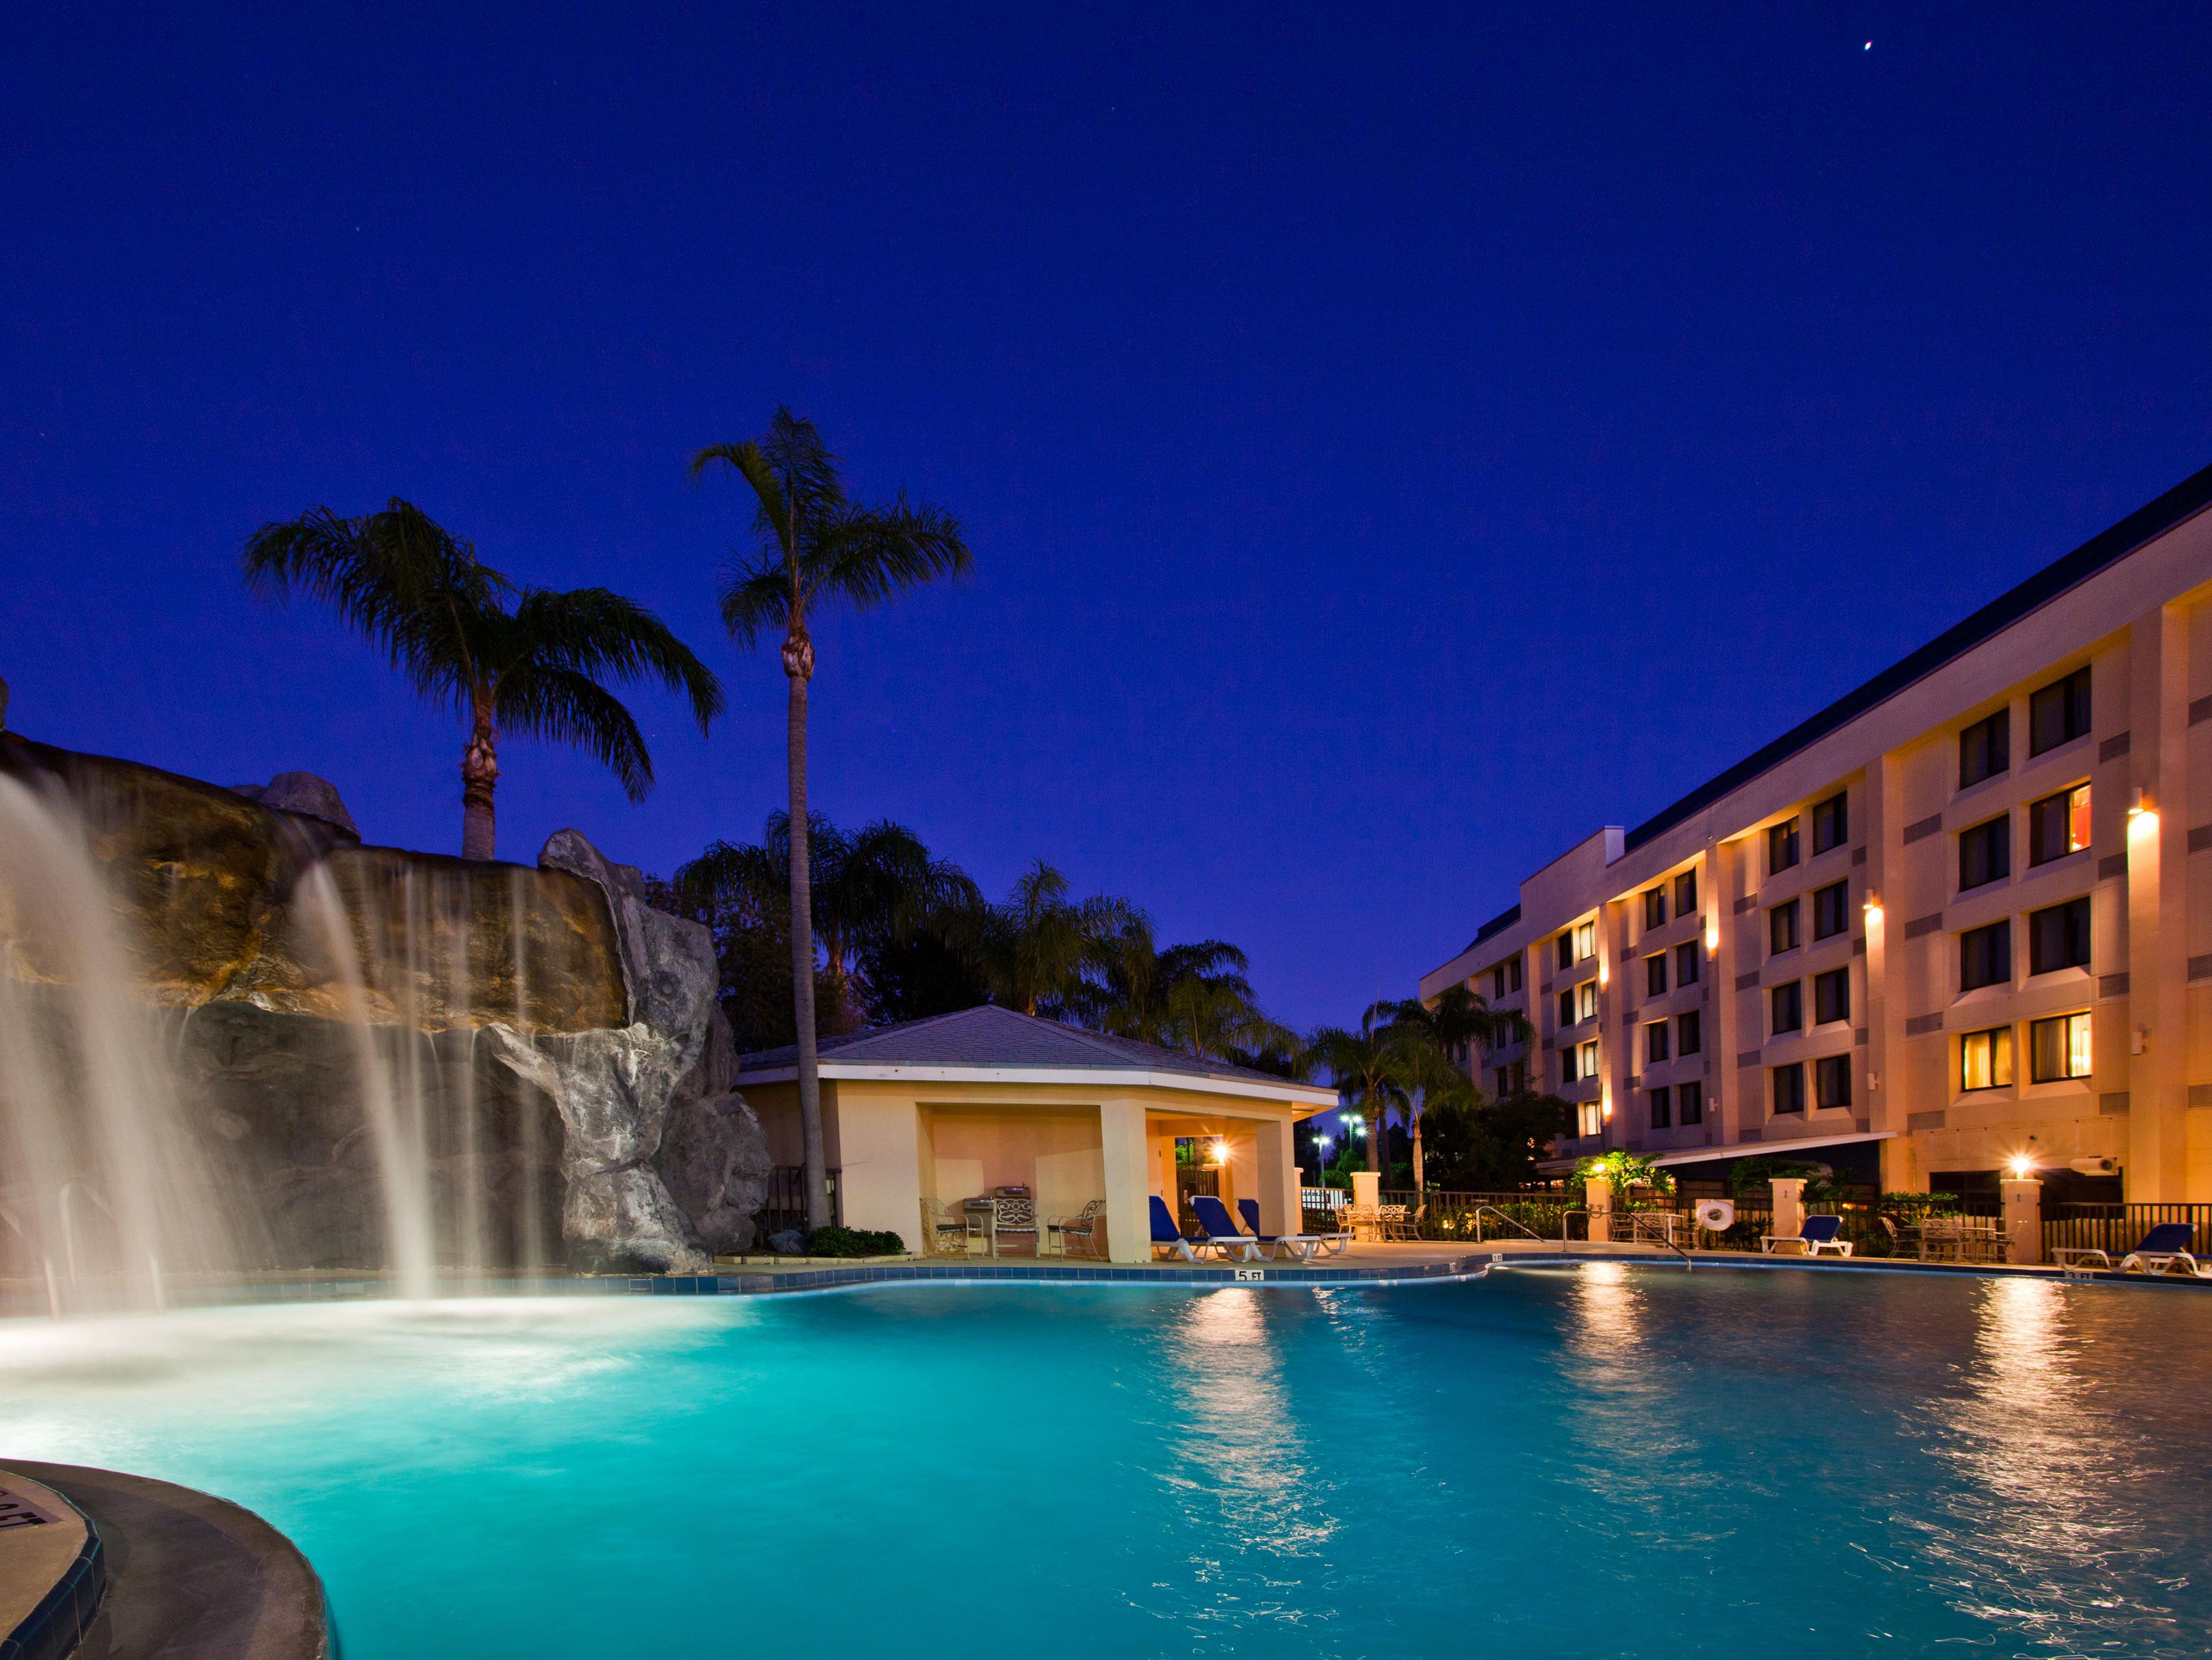 Unwind beside our pool while listening to the waterfall. 